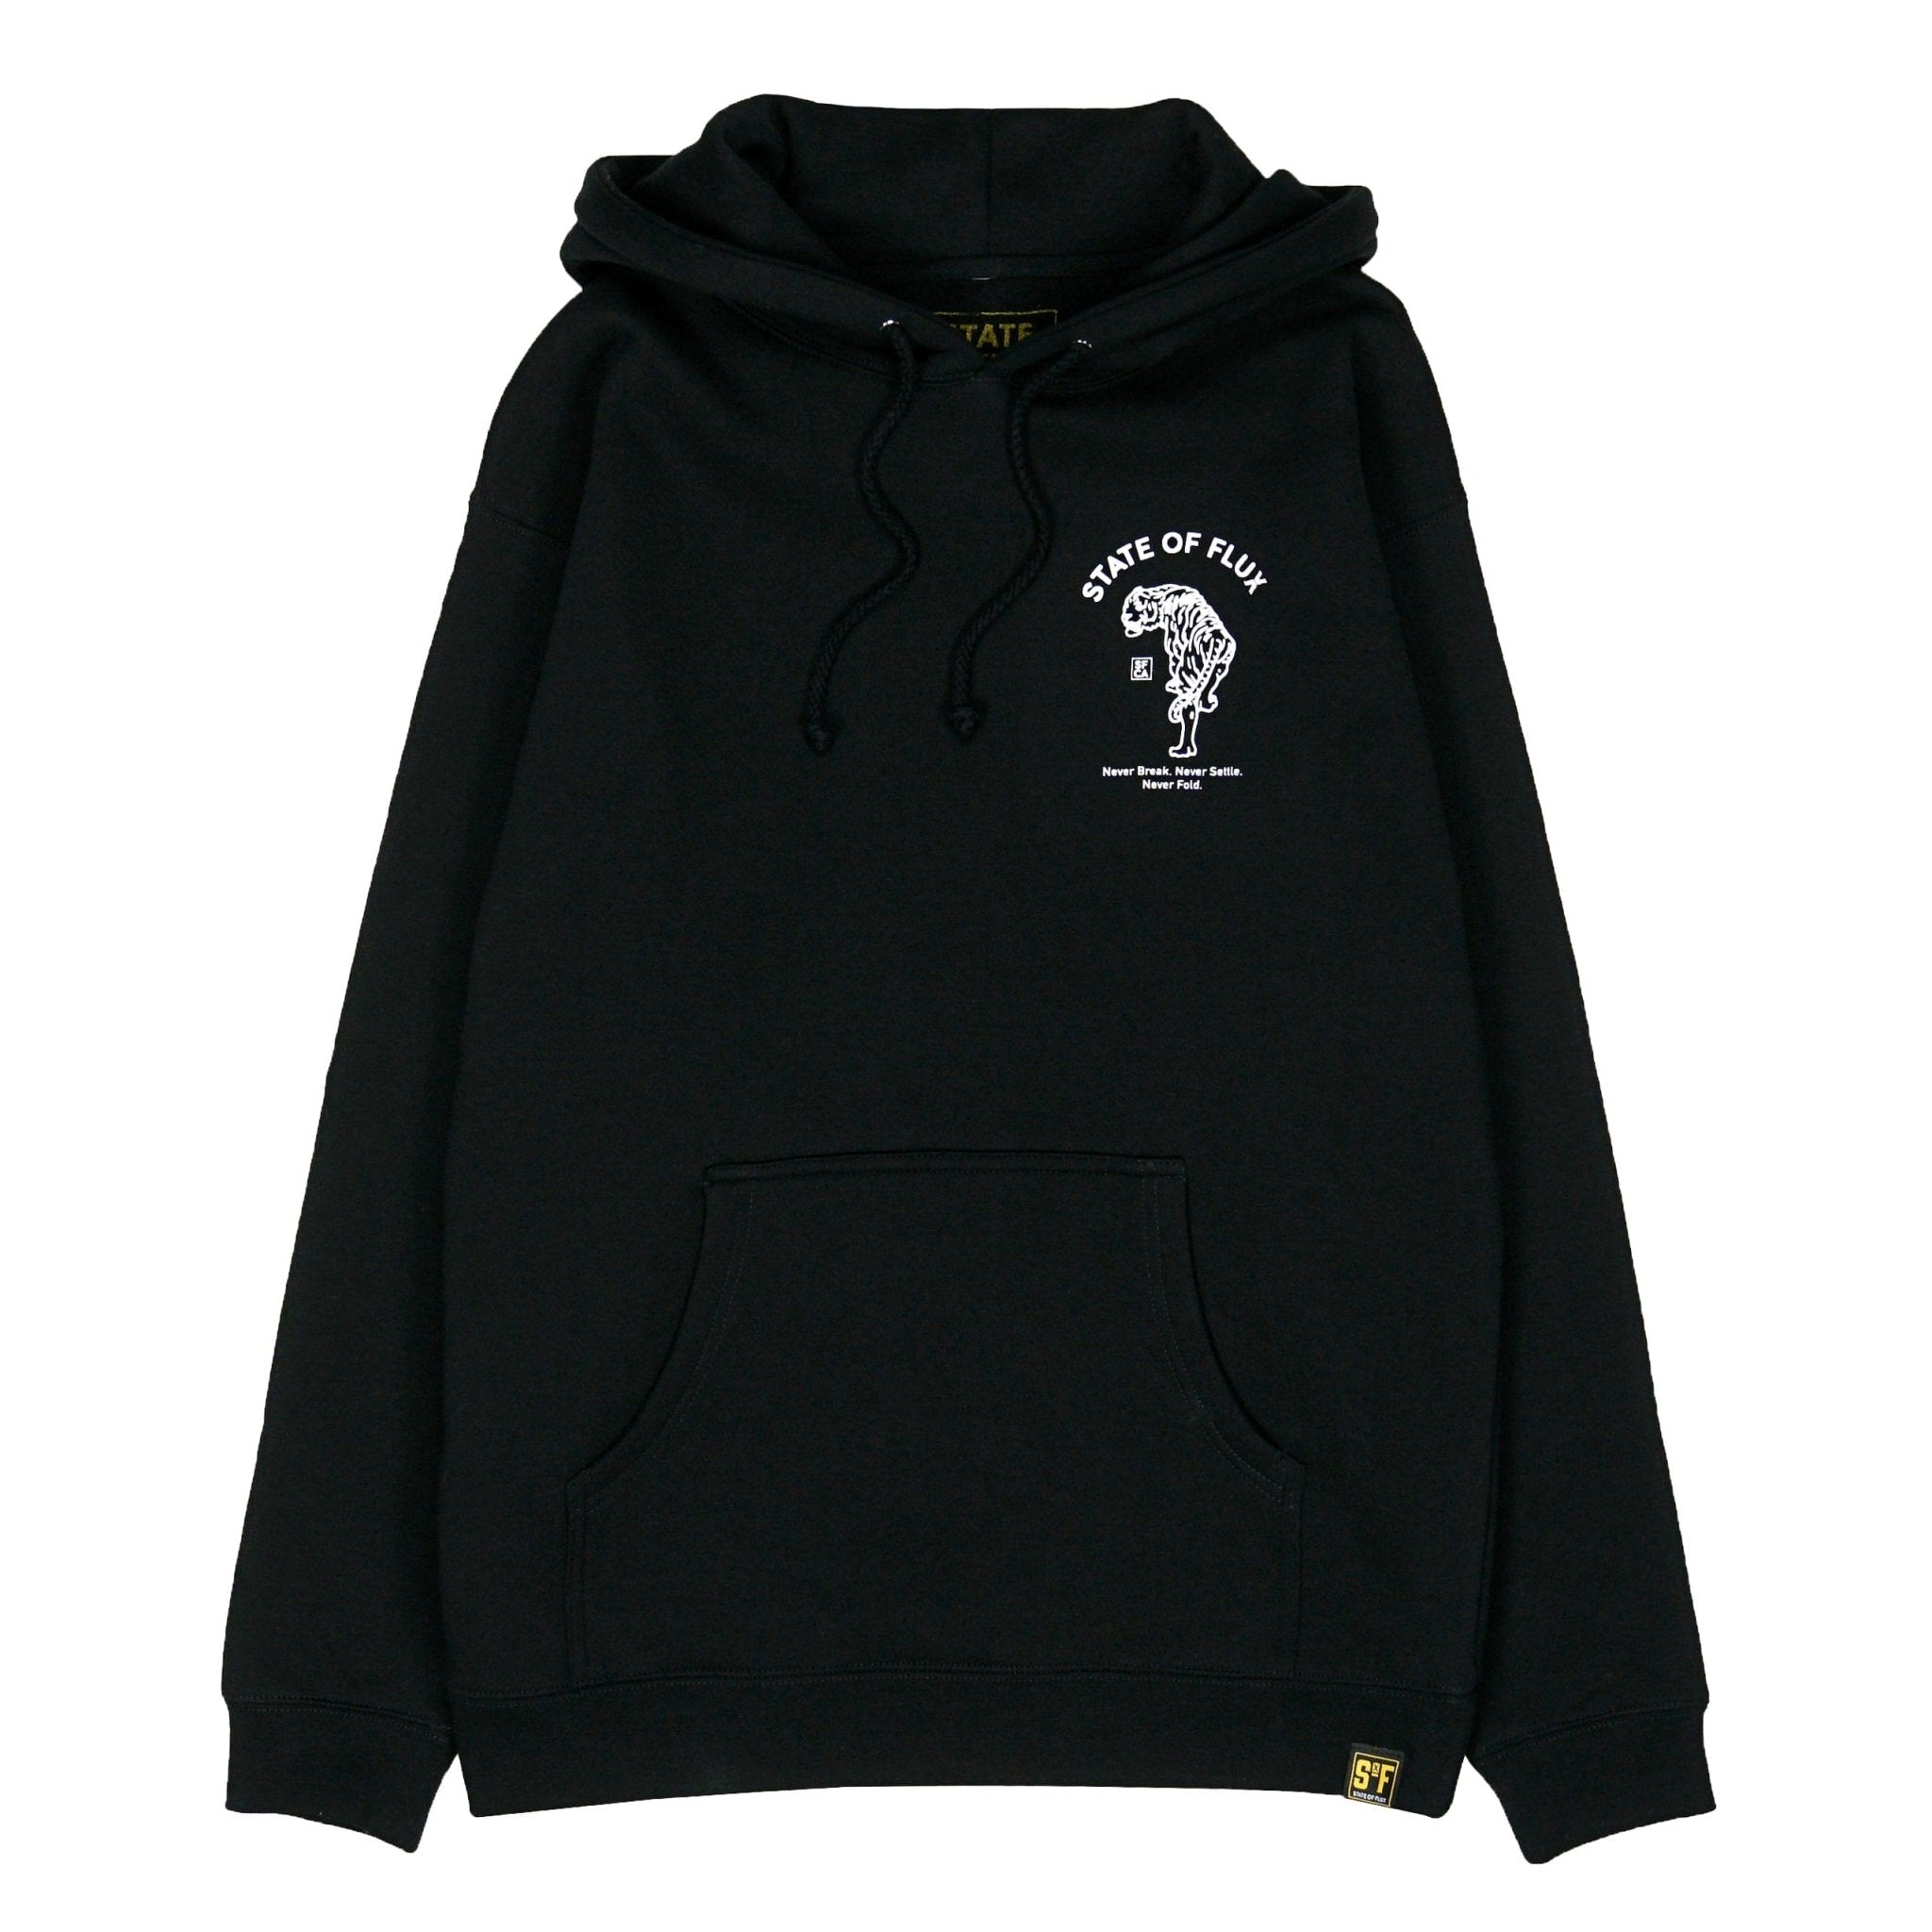 Prowler Hoodie in black and white - State Of Flux - State Of Flux